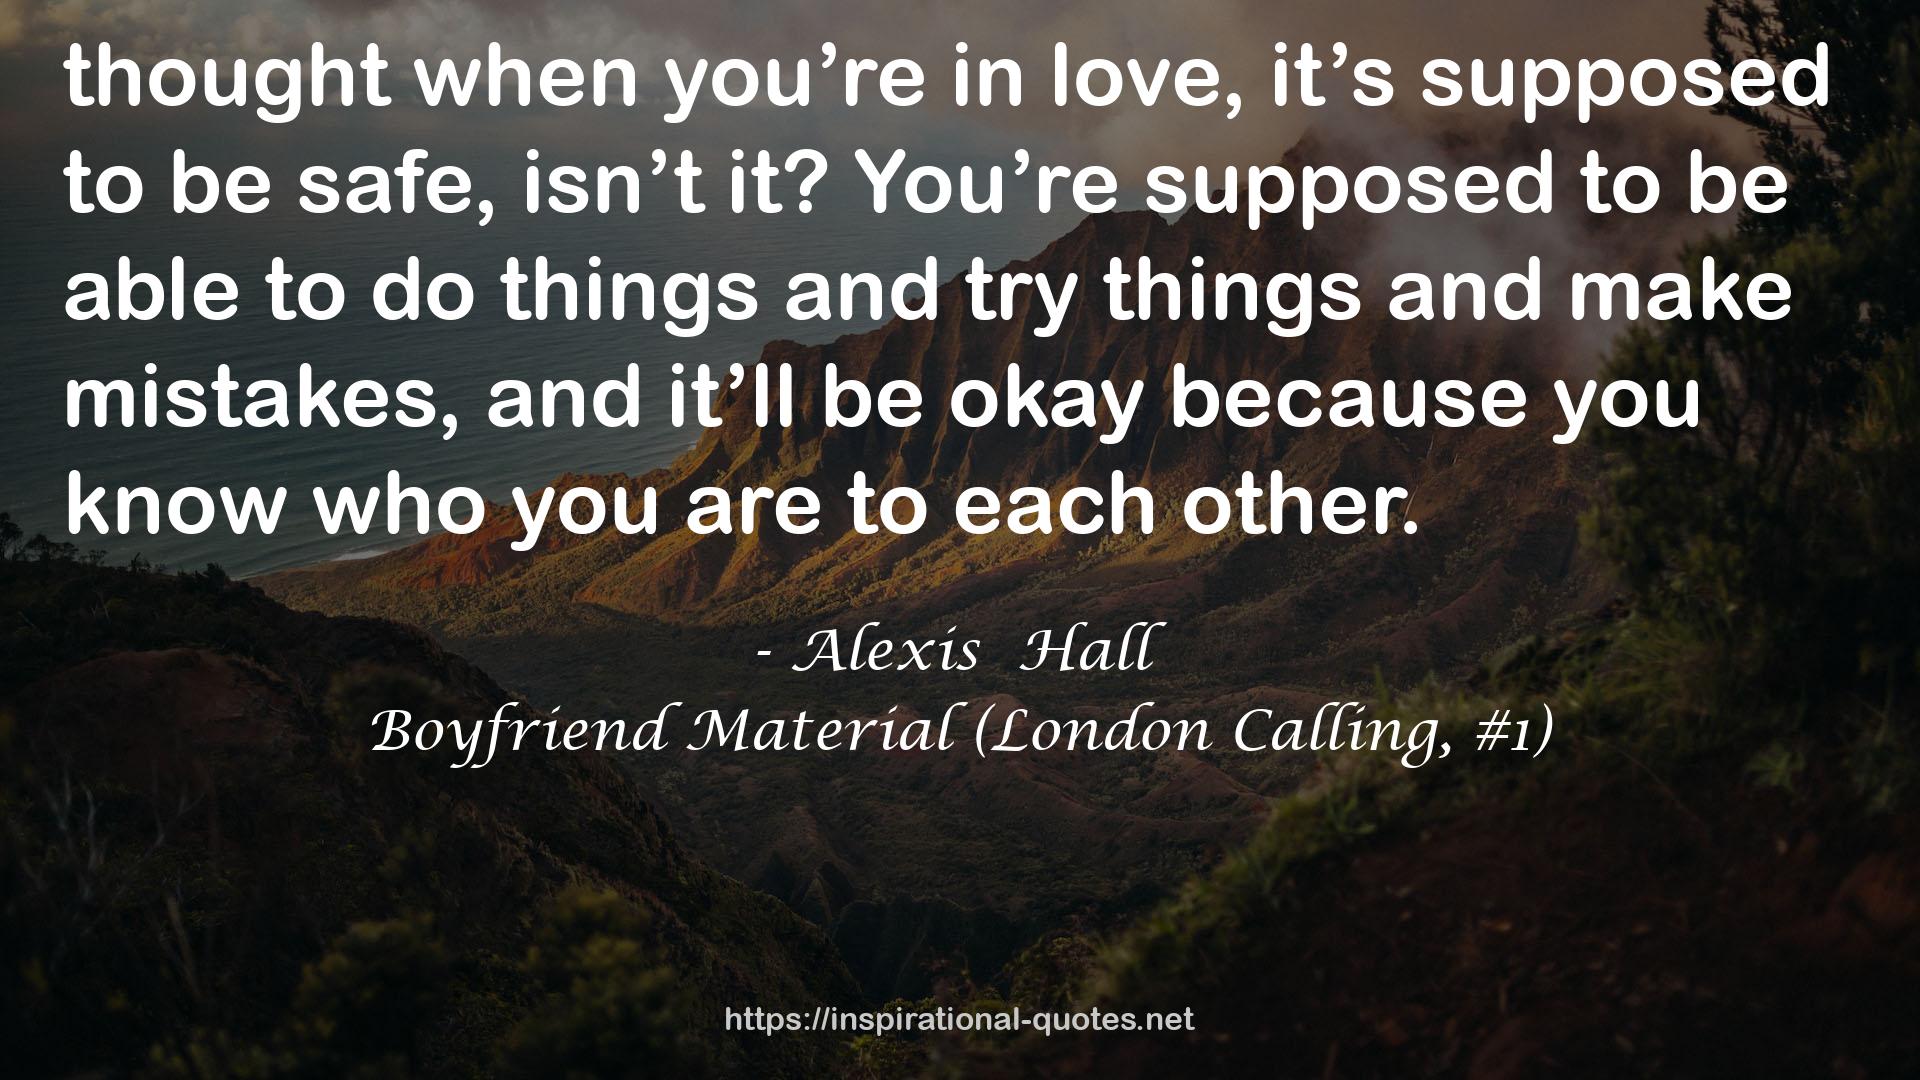 Boyfriend Material (London Calling, #1) QUOTES